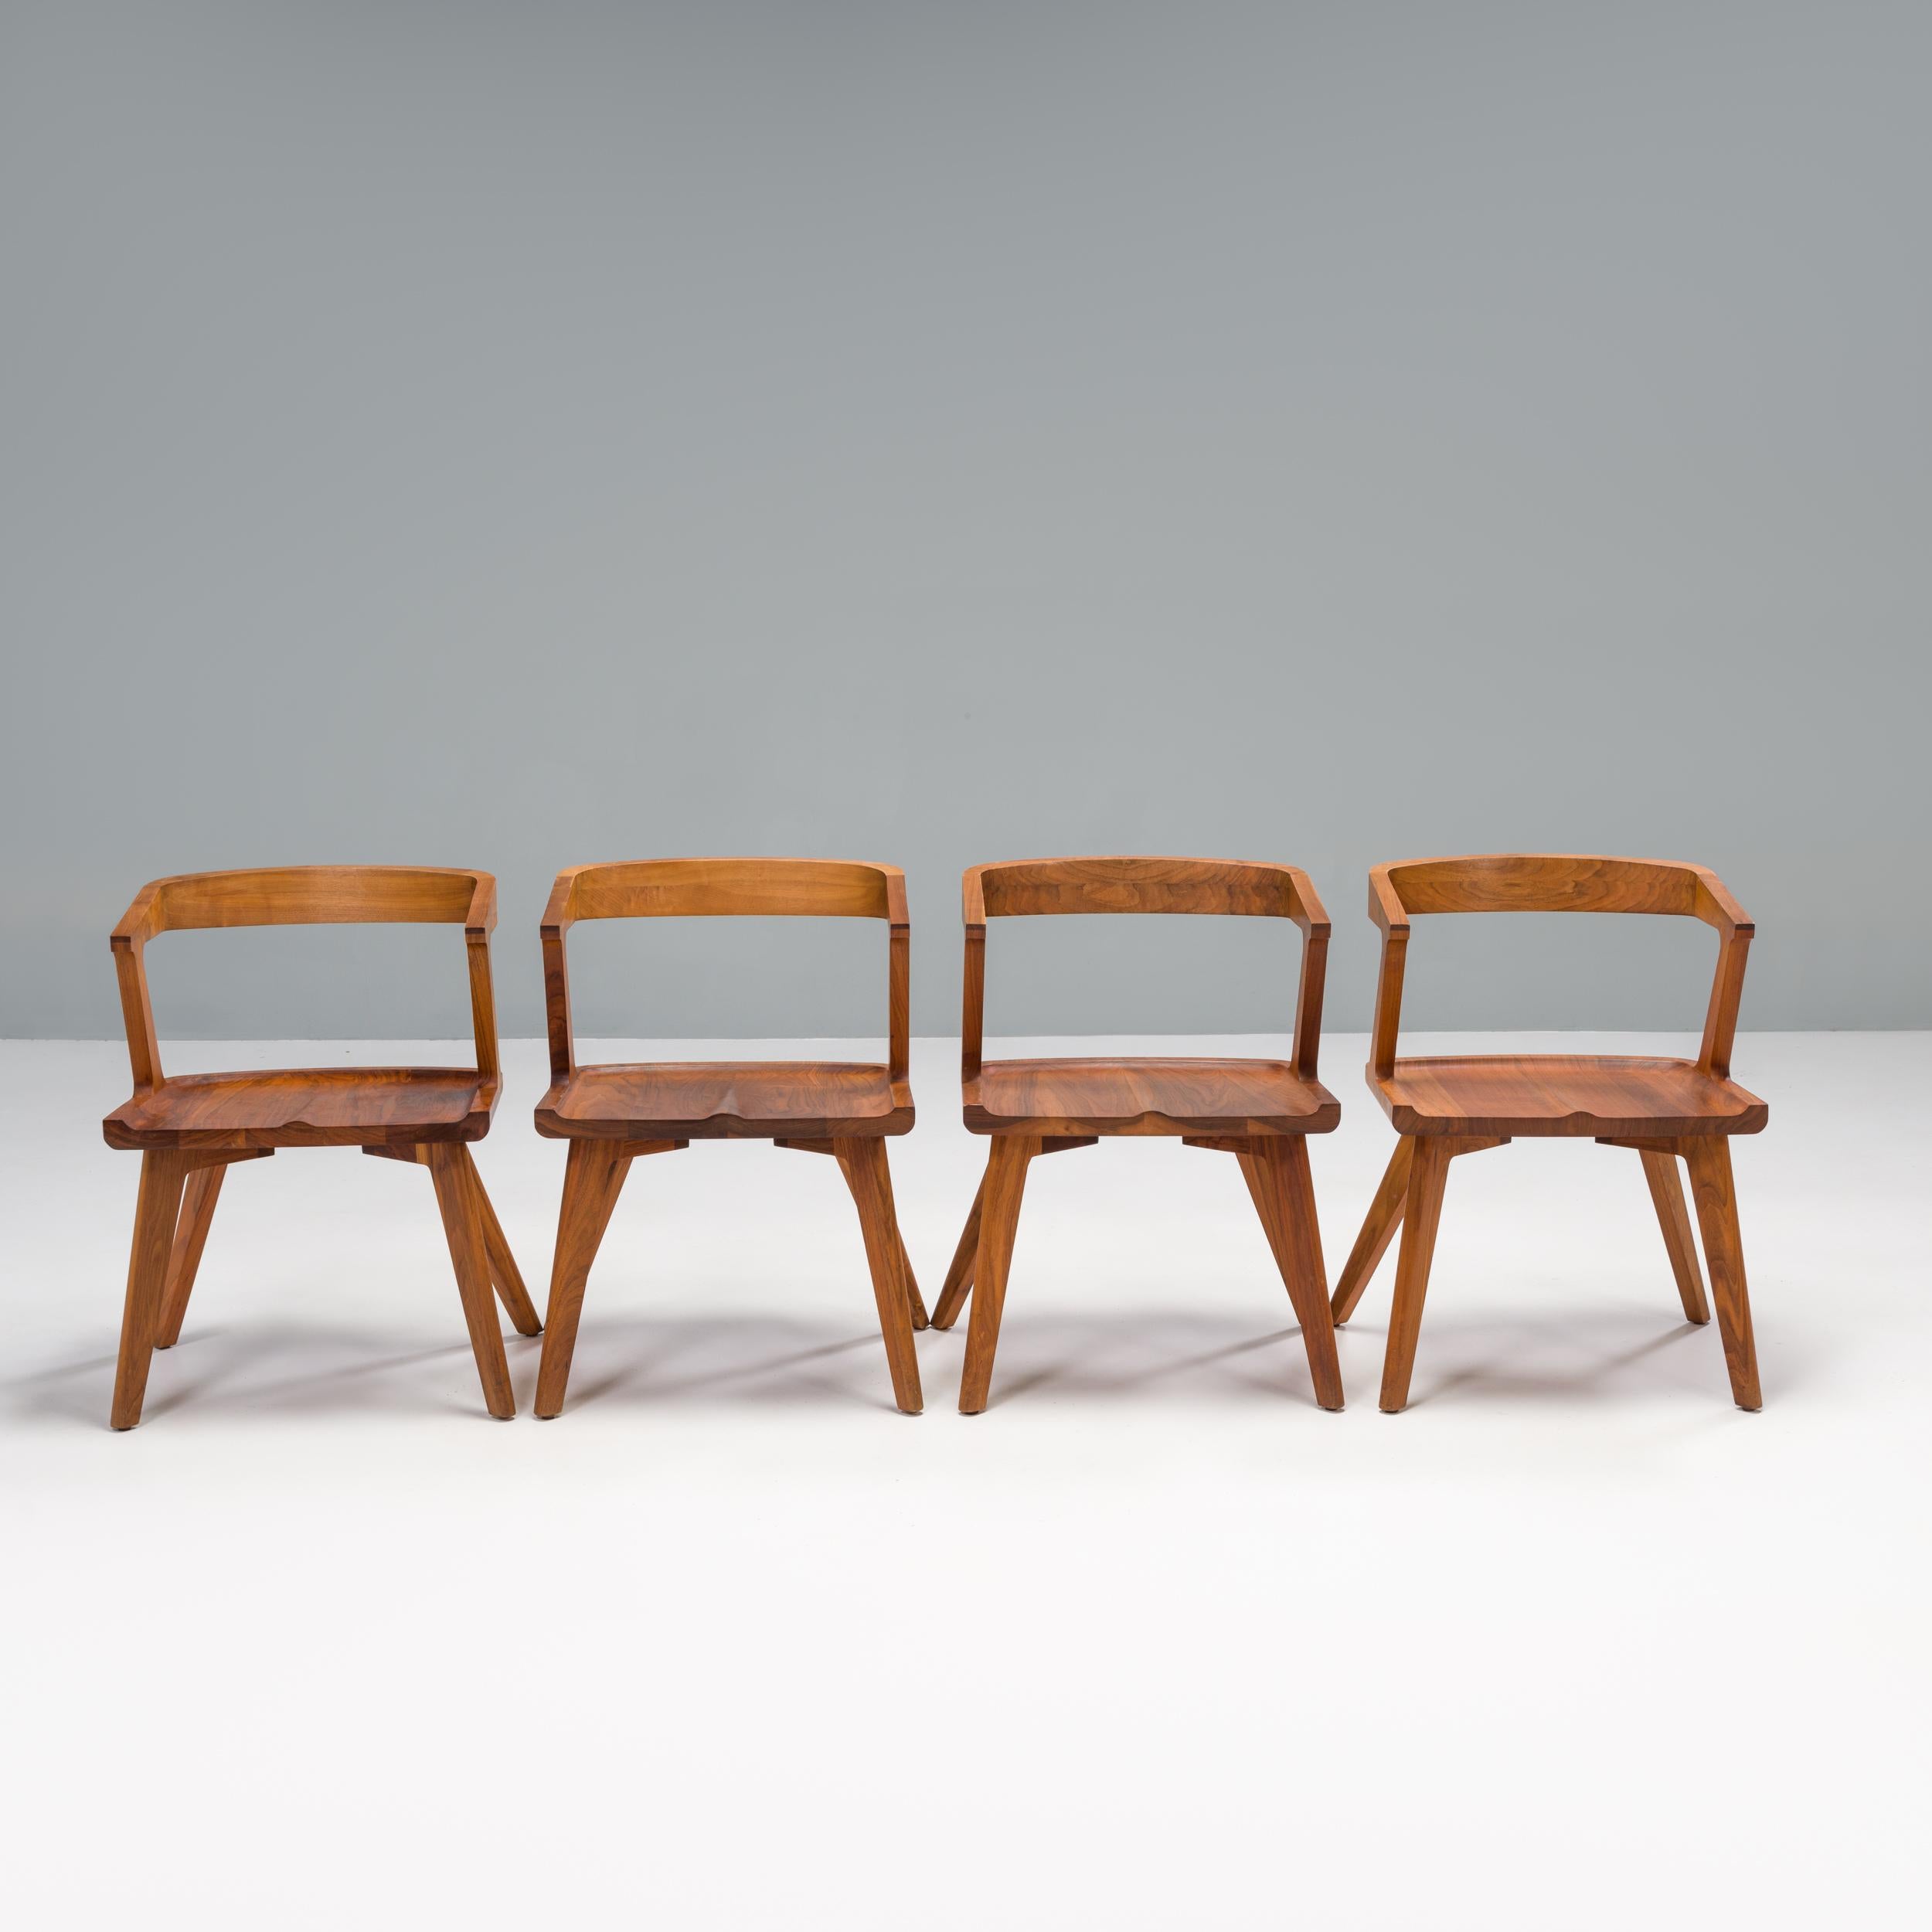 Designed by Matthew Hilton and produced in the De la Espada factory in Portugal, the Colombo dining armchairs are beautifully crafted.

Constructed from Danish oiled walnut, the chairs give the impression they have been carved out, with integrated